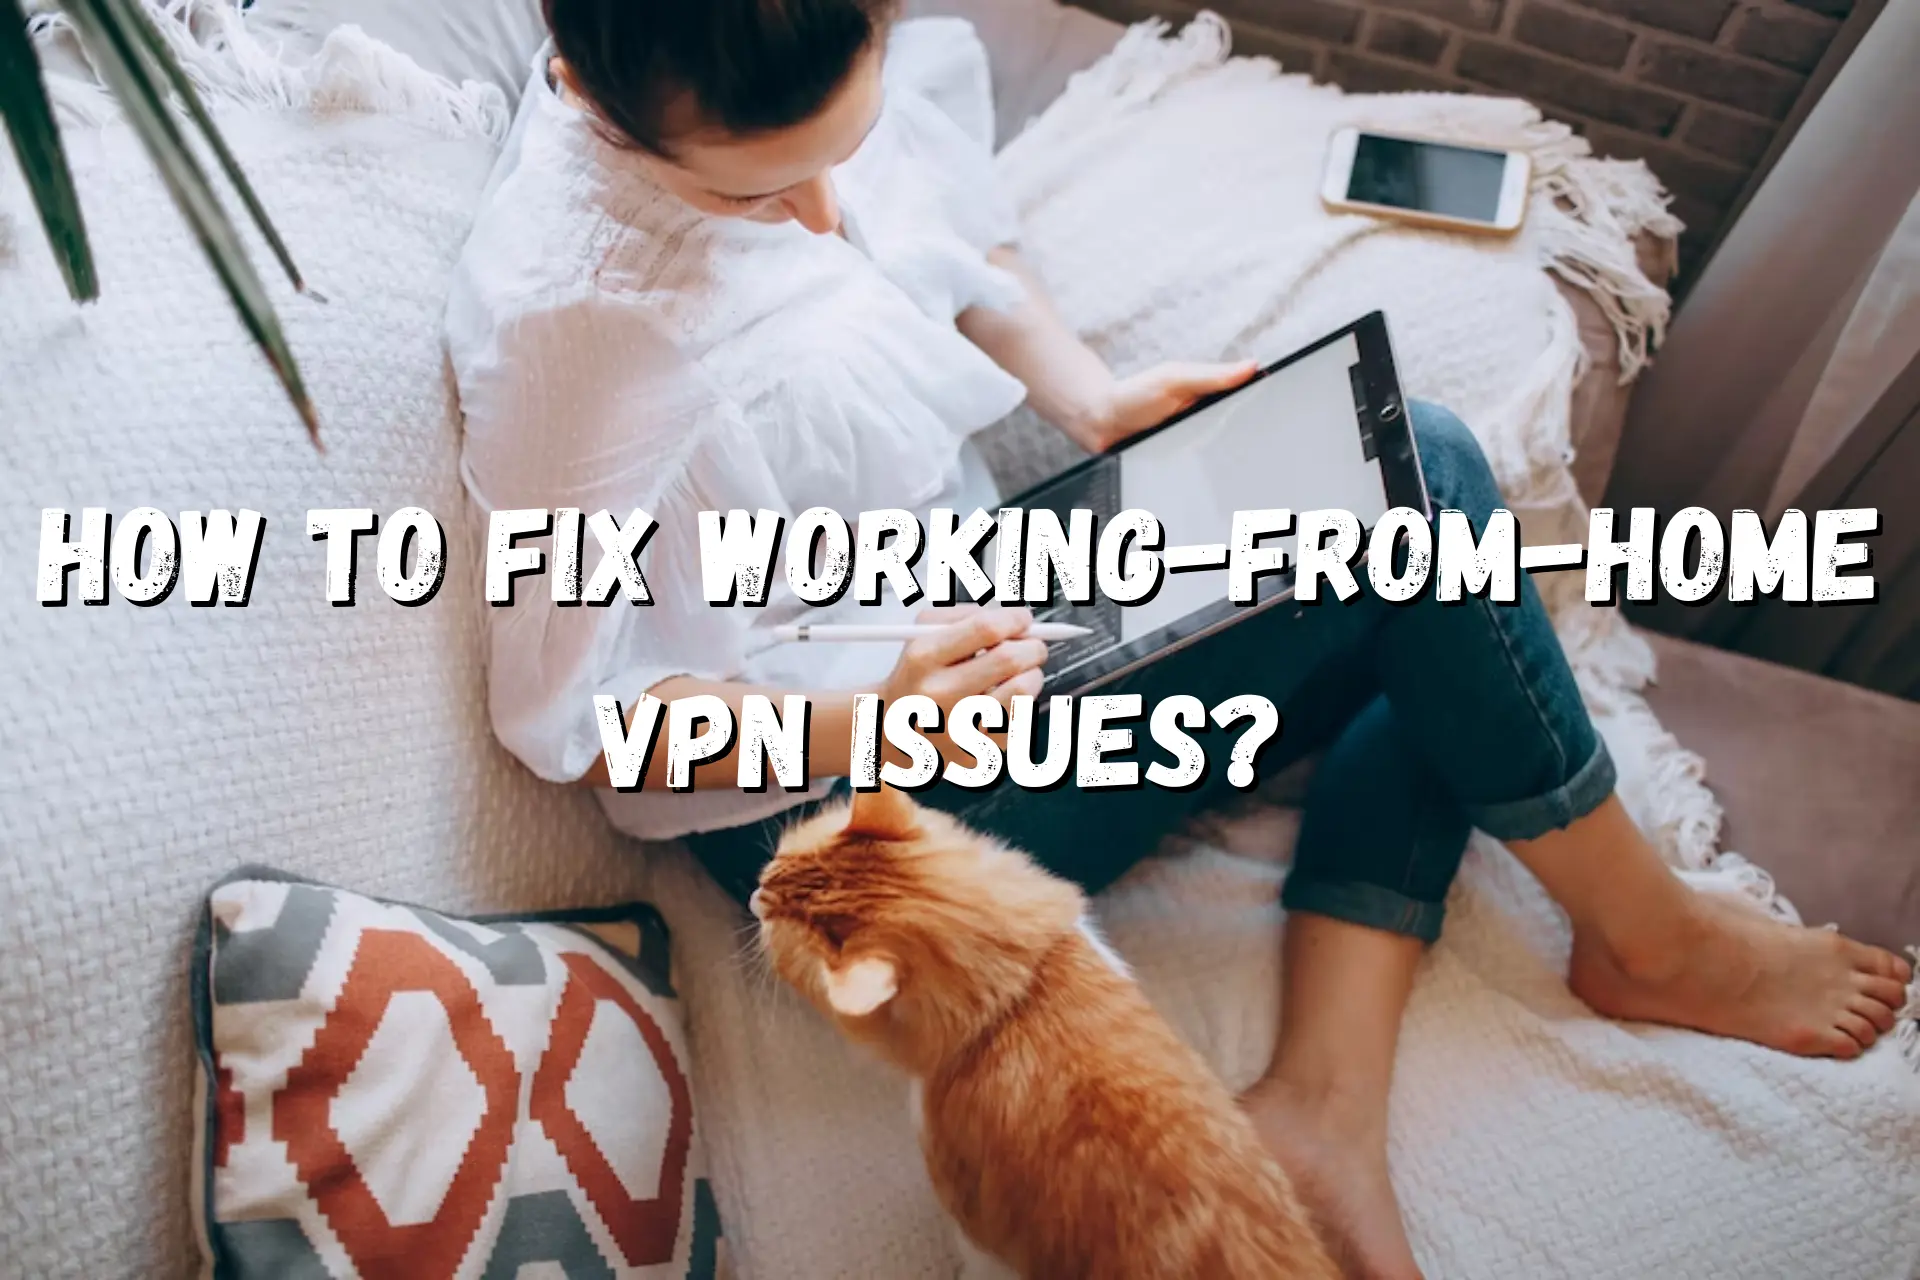 Working from home VPN issues